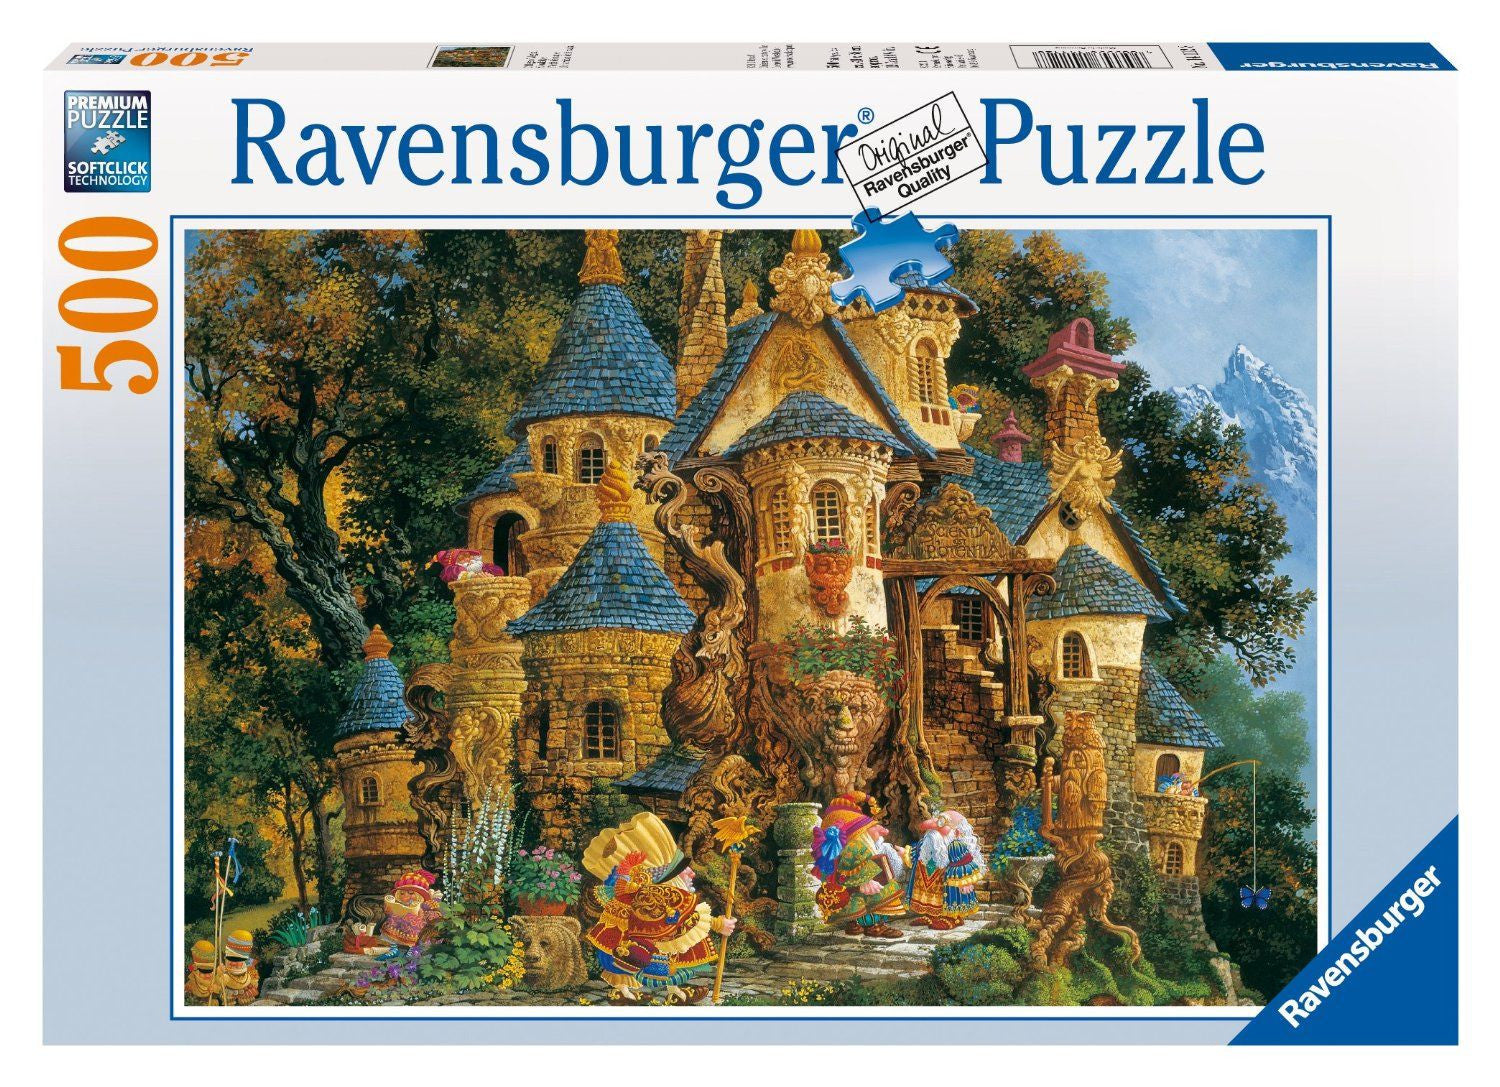 Ravensburger Adult Puzzles 500 pc Puzzles - College of Magical Knowledge 14112